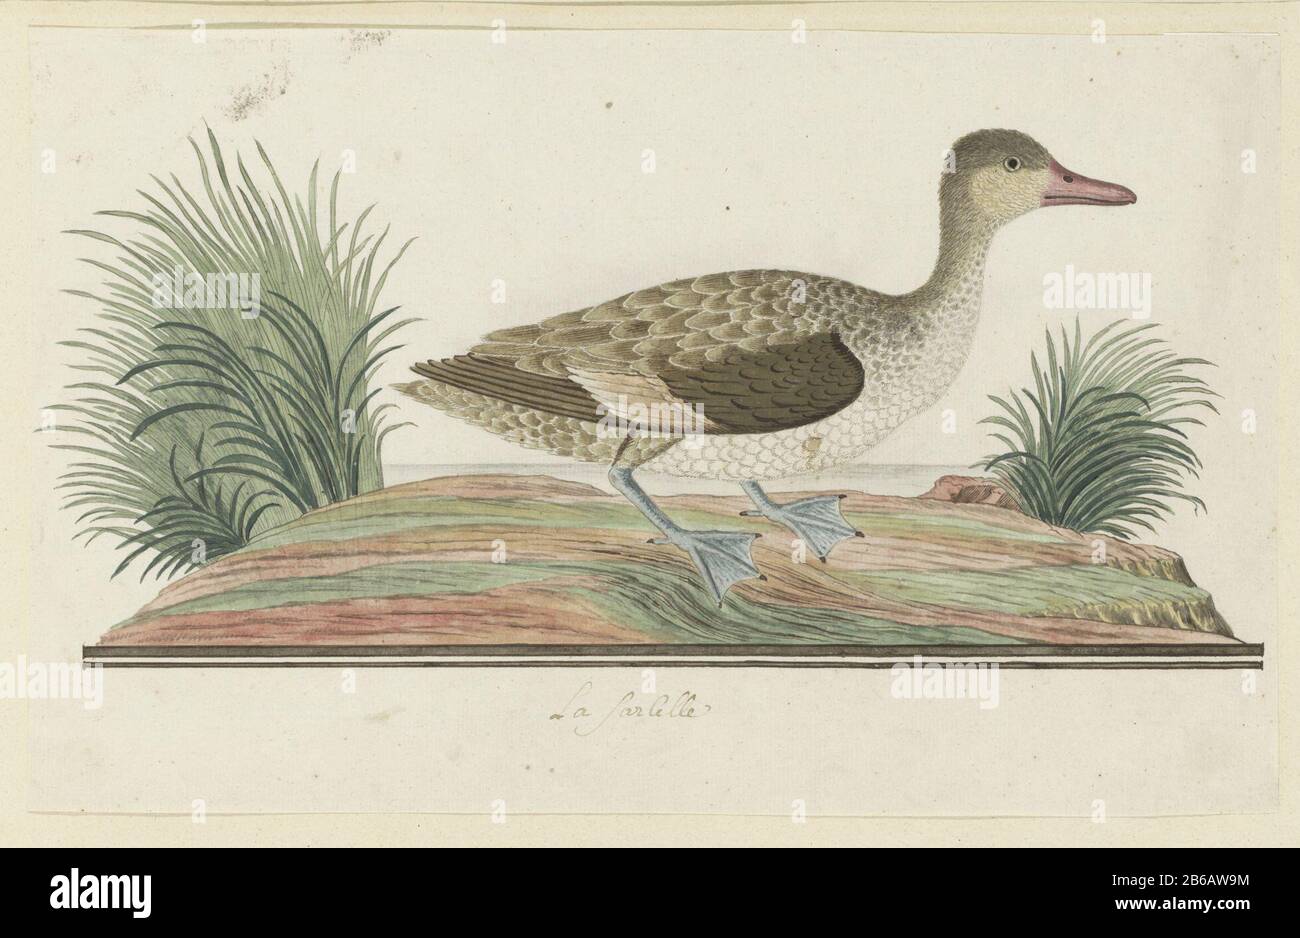 Anas erythrorhyncha (red-billed teal) La Sarcelle (title object) Anas erythrorhyncha (red-billed teal) La Sarcelle (title object) Property Type: Drawing album leaf Item number: RP-T-1914-17-344 Inscriptions / Brands: annotation in the margin mo, pen in brown: 'La Sarcelle (French designation of Levaillant handwriting text: LC Rookmaker, Appendix I of his essay, p 241). Description: Bird Study: Red-necked Duck (Anas erythrorhyncha) . Manufacturer : artist: Robert Jacob Gordon Date: Oct 1777 - mar- 1786 Physical features: pen in ink, brush in watercolor in colors, pencil and black chalk, double Stock Photo